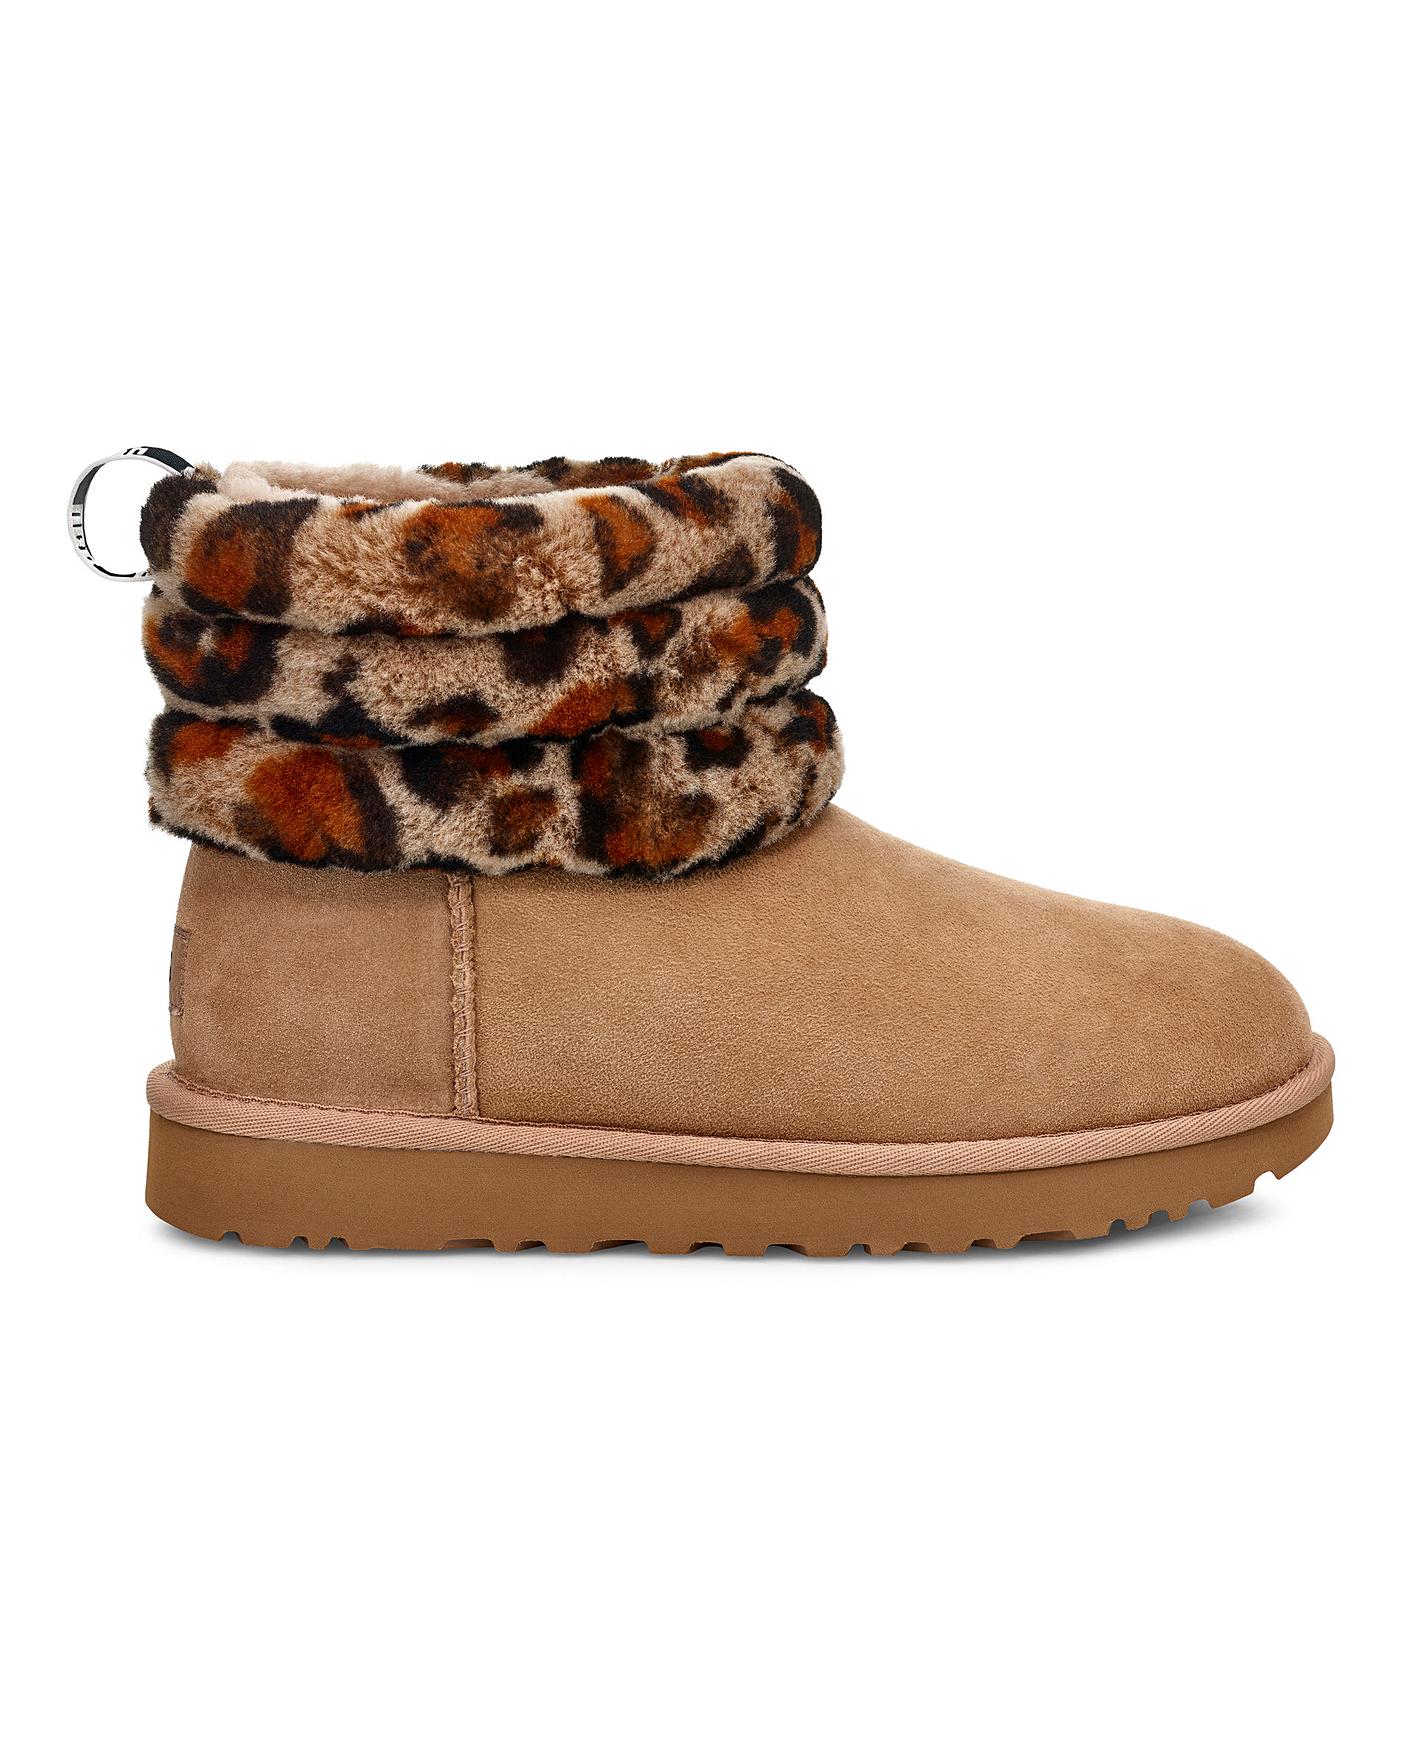 ugg fluff mini quilted leopard